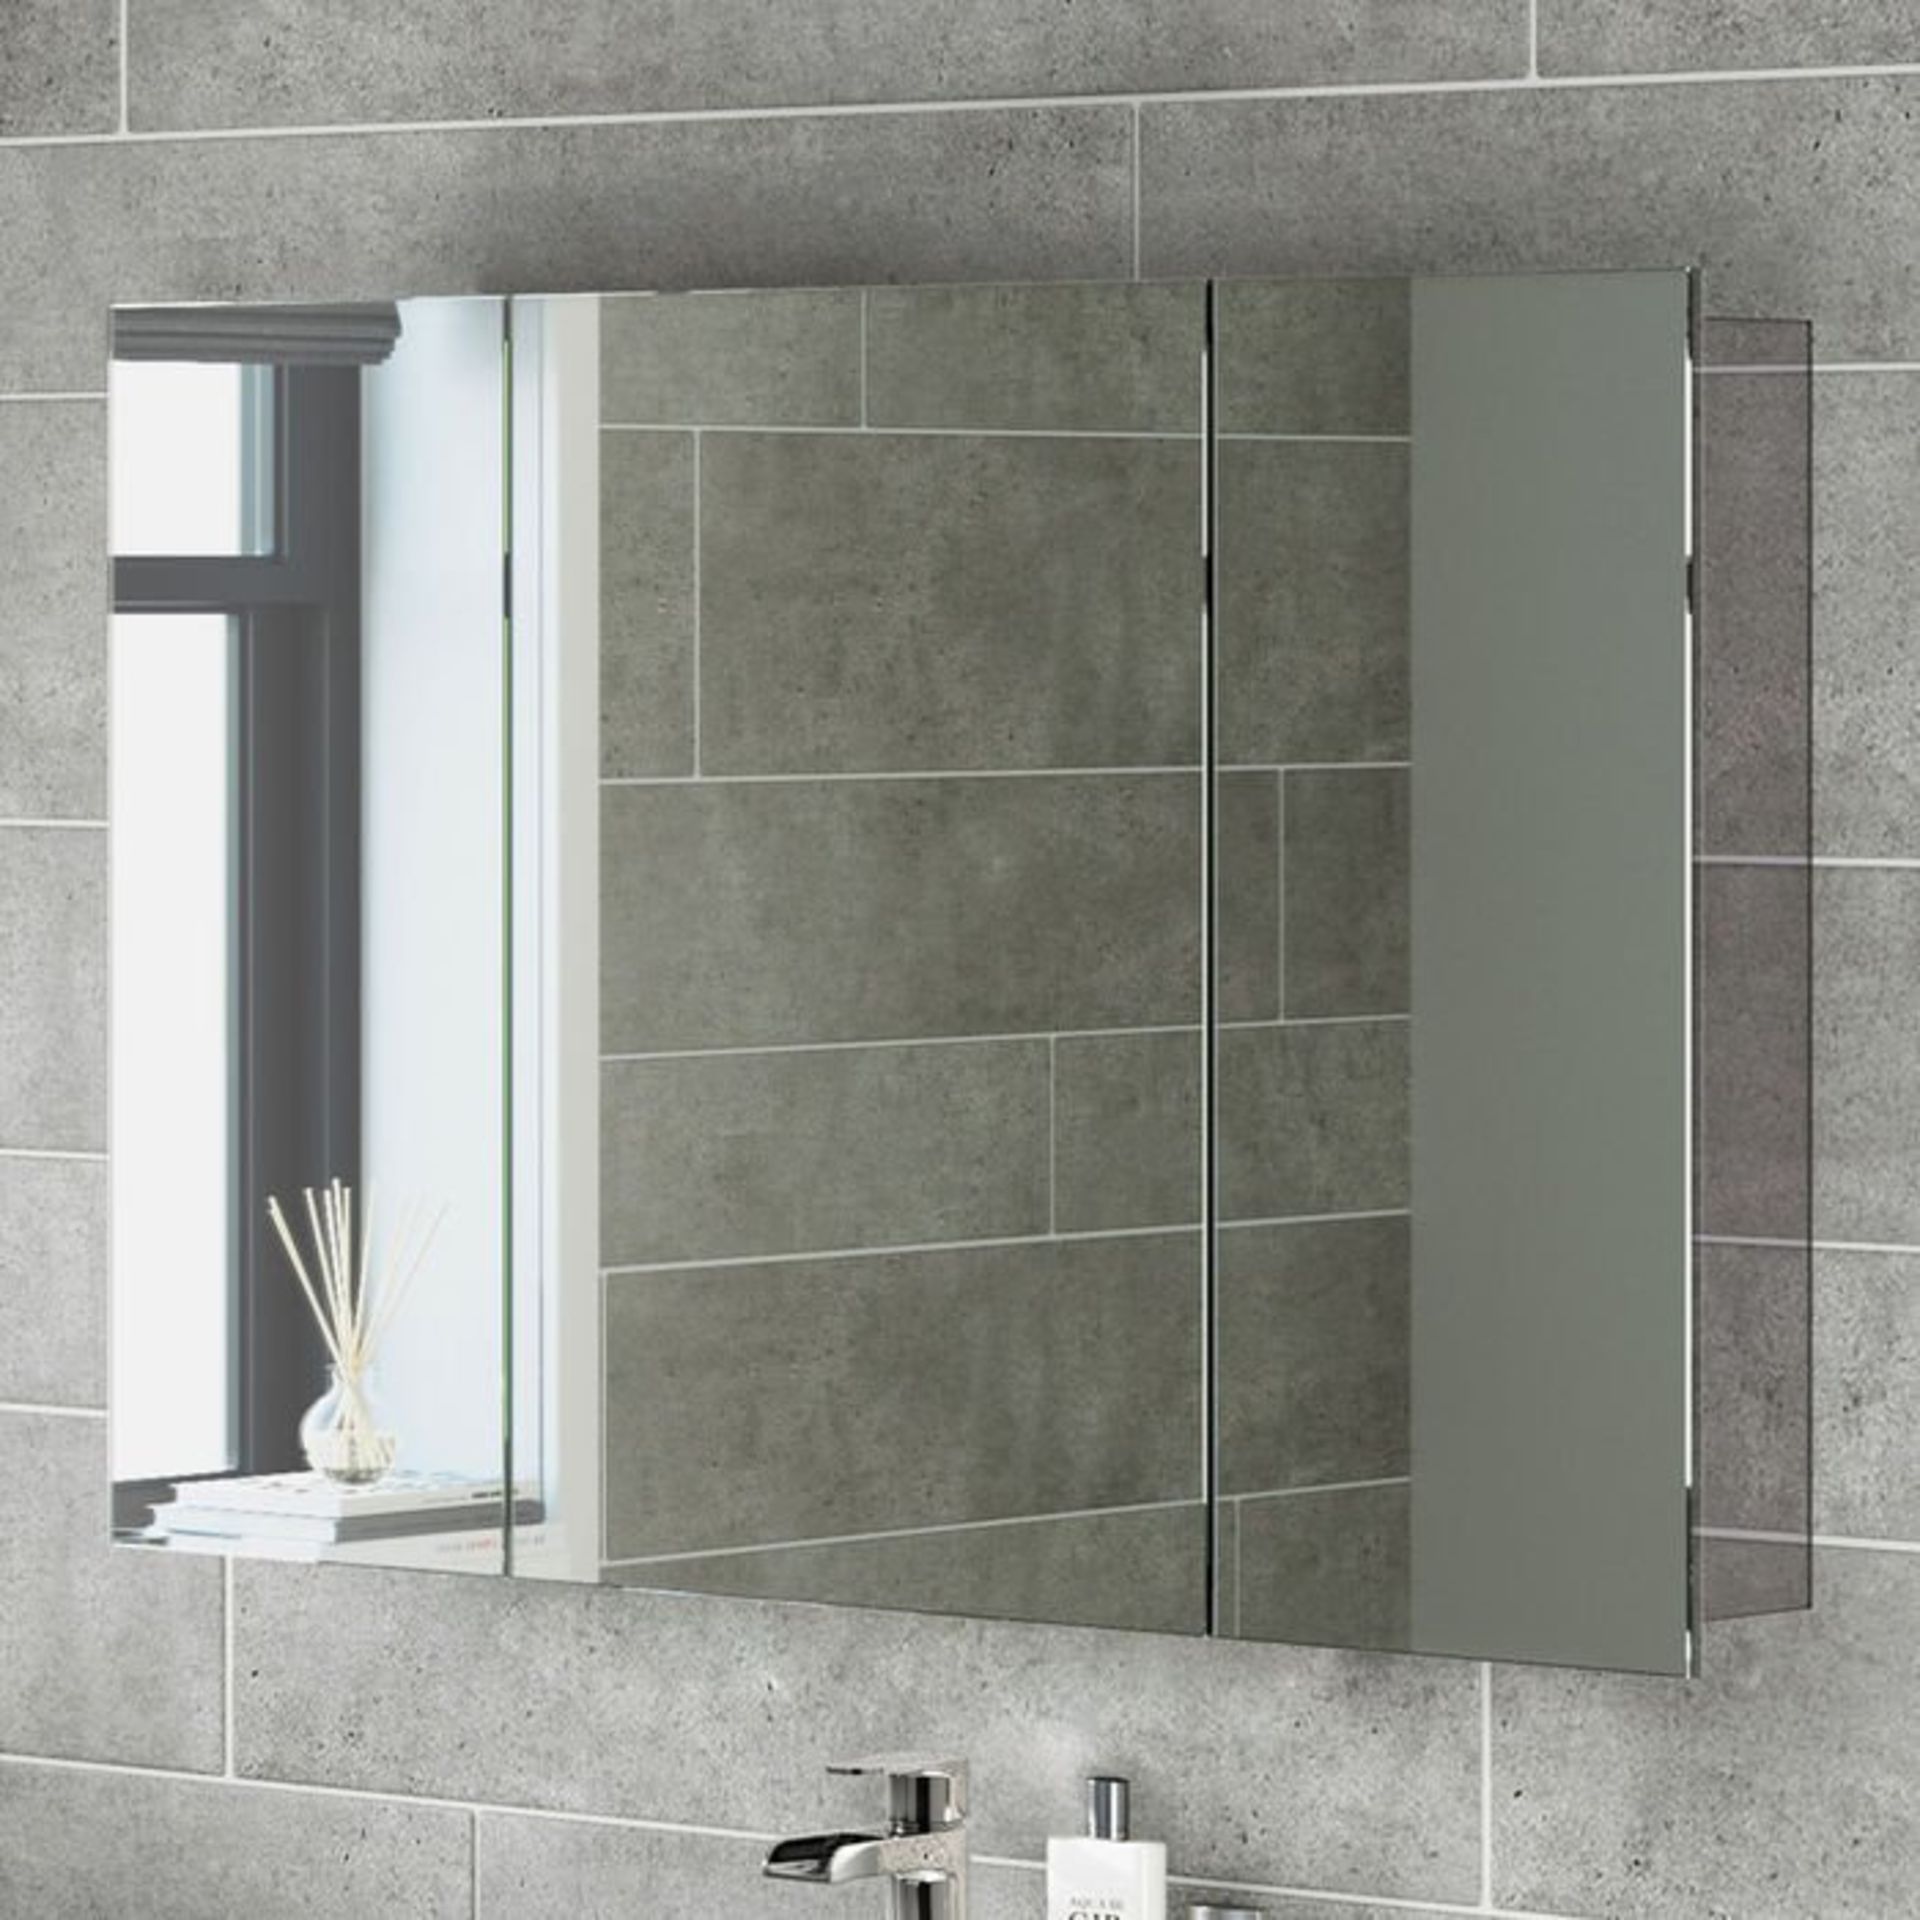 (J231) 600x900mm Liberty Stainless Steel Triple Door Mirror Cabinet. RRP £349.99. Made from high-